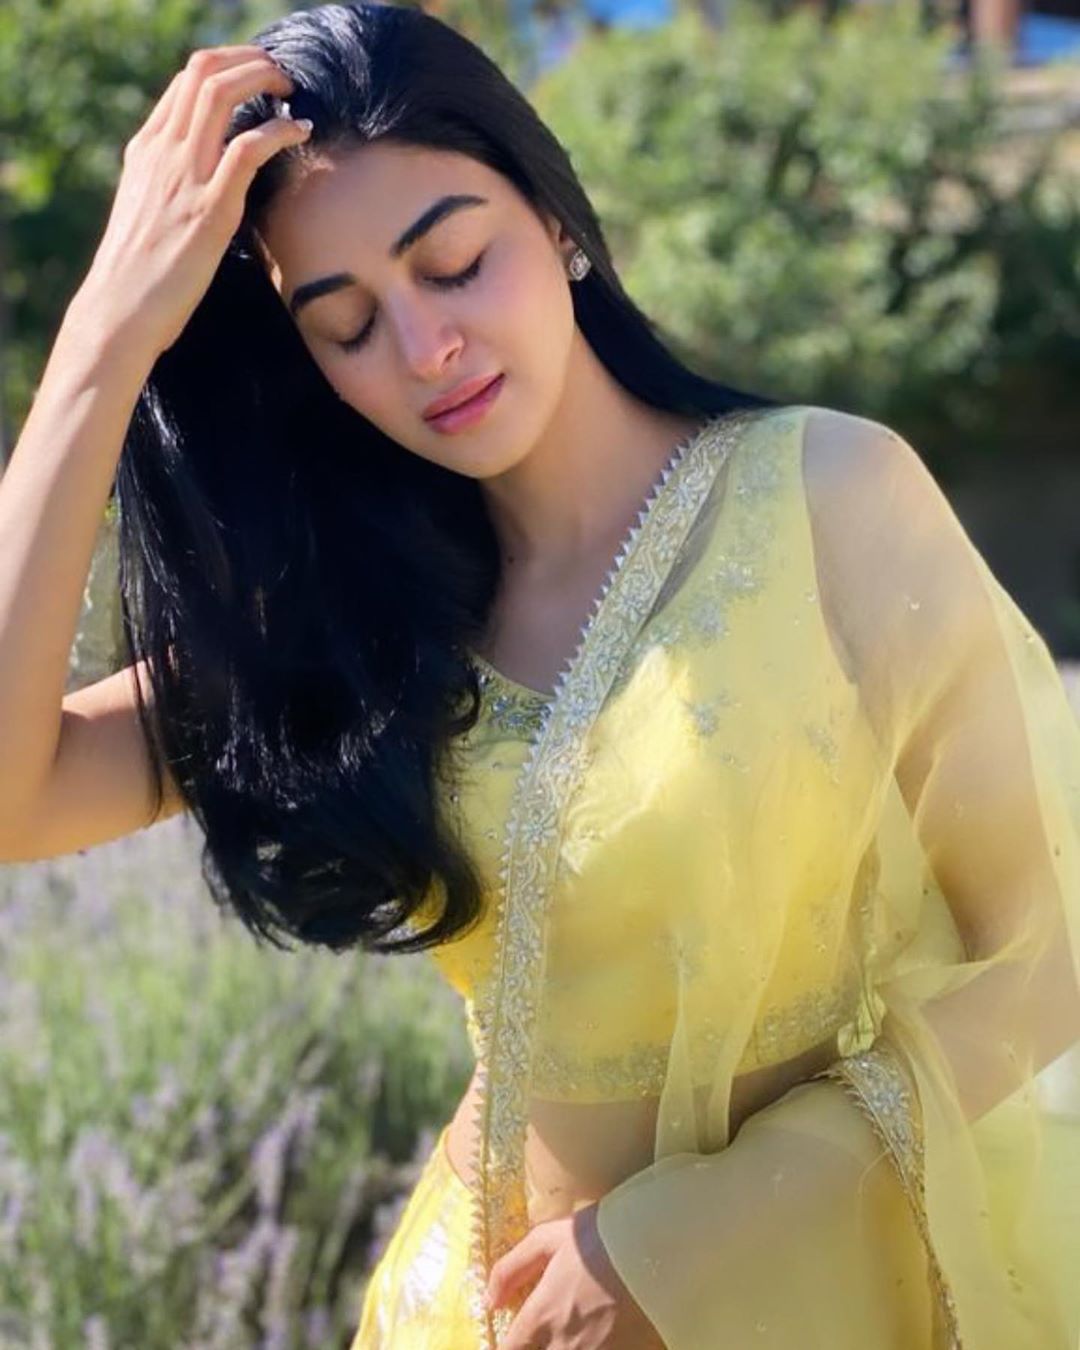 Actress Anmol Baloch is Looking Stunning in this Beautiful Yellow Dress